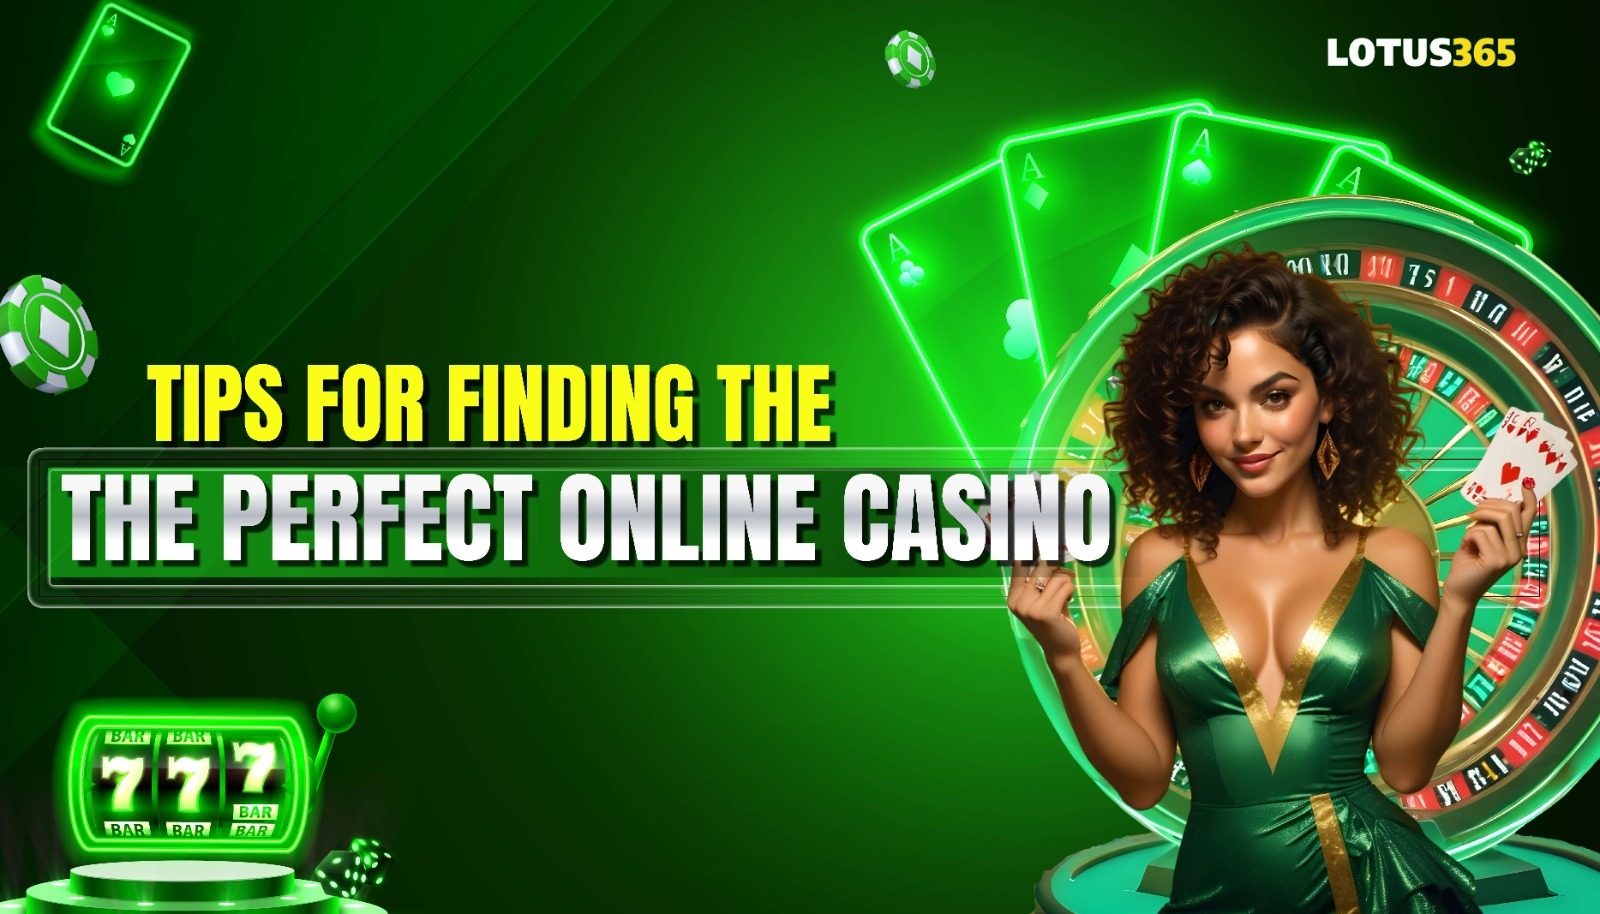 Tips For Finding the Perfect Online Casino - WriteUpCafe.com